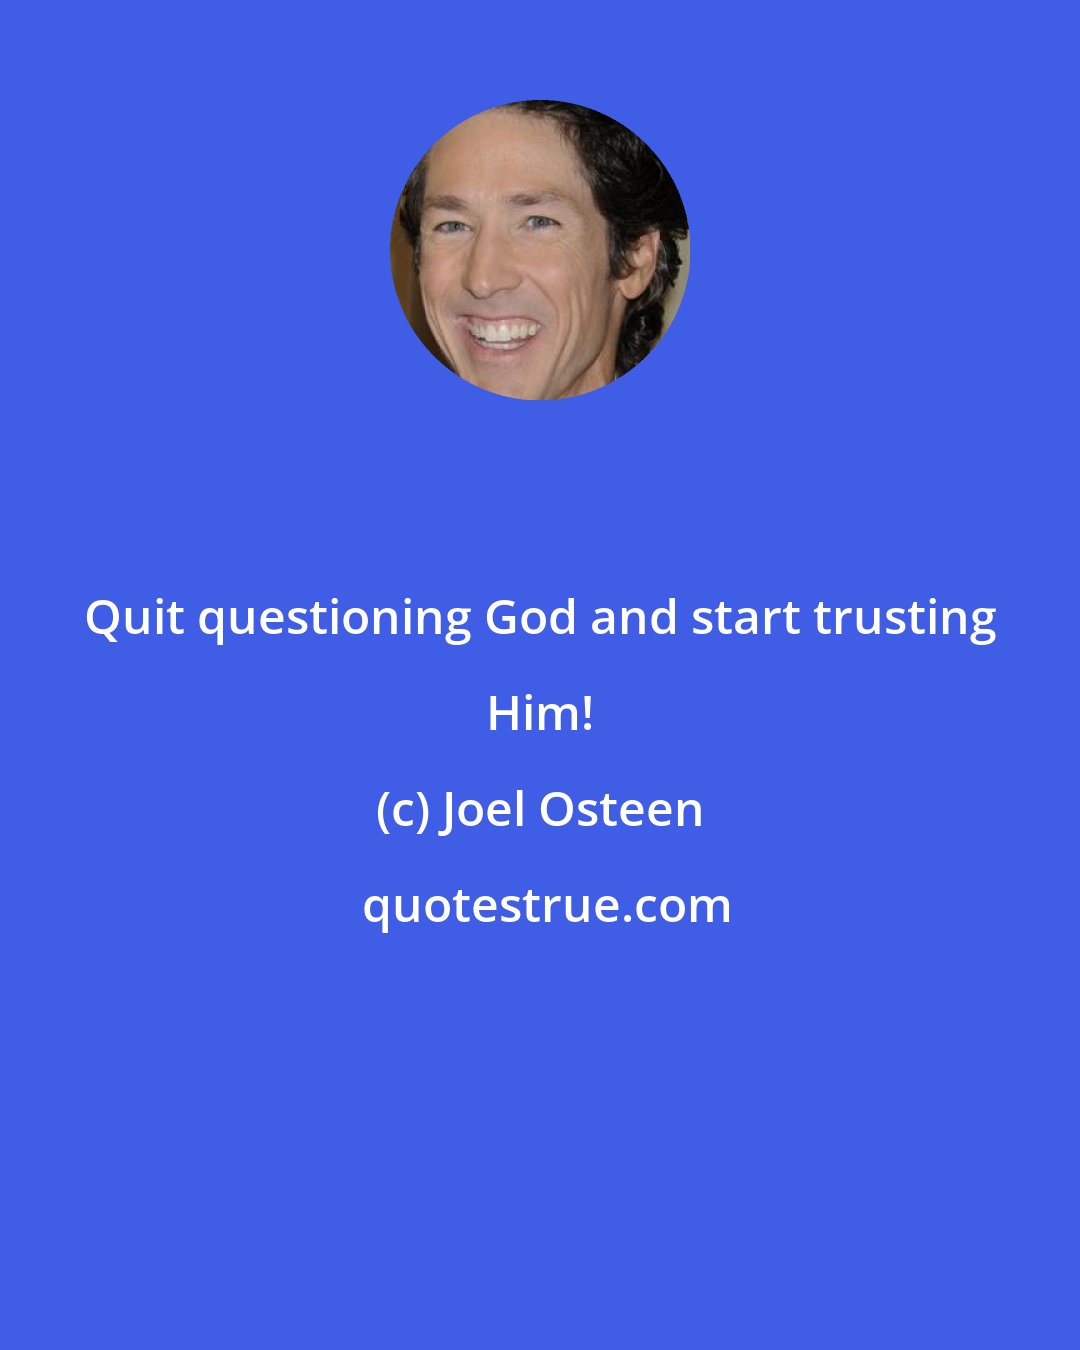 Joel Osteen: Quit questioning God and start trusting Him!